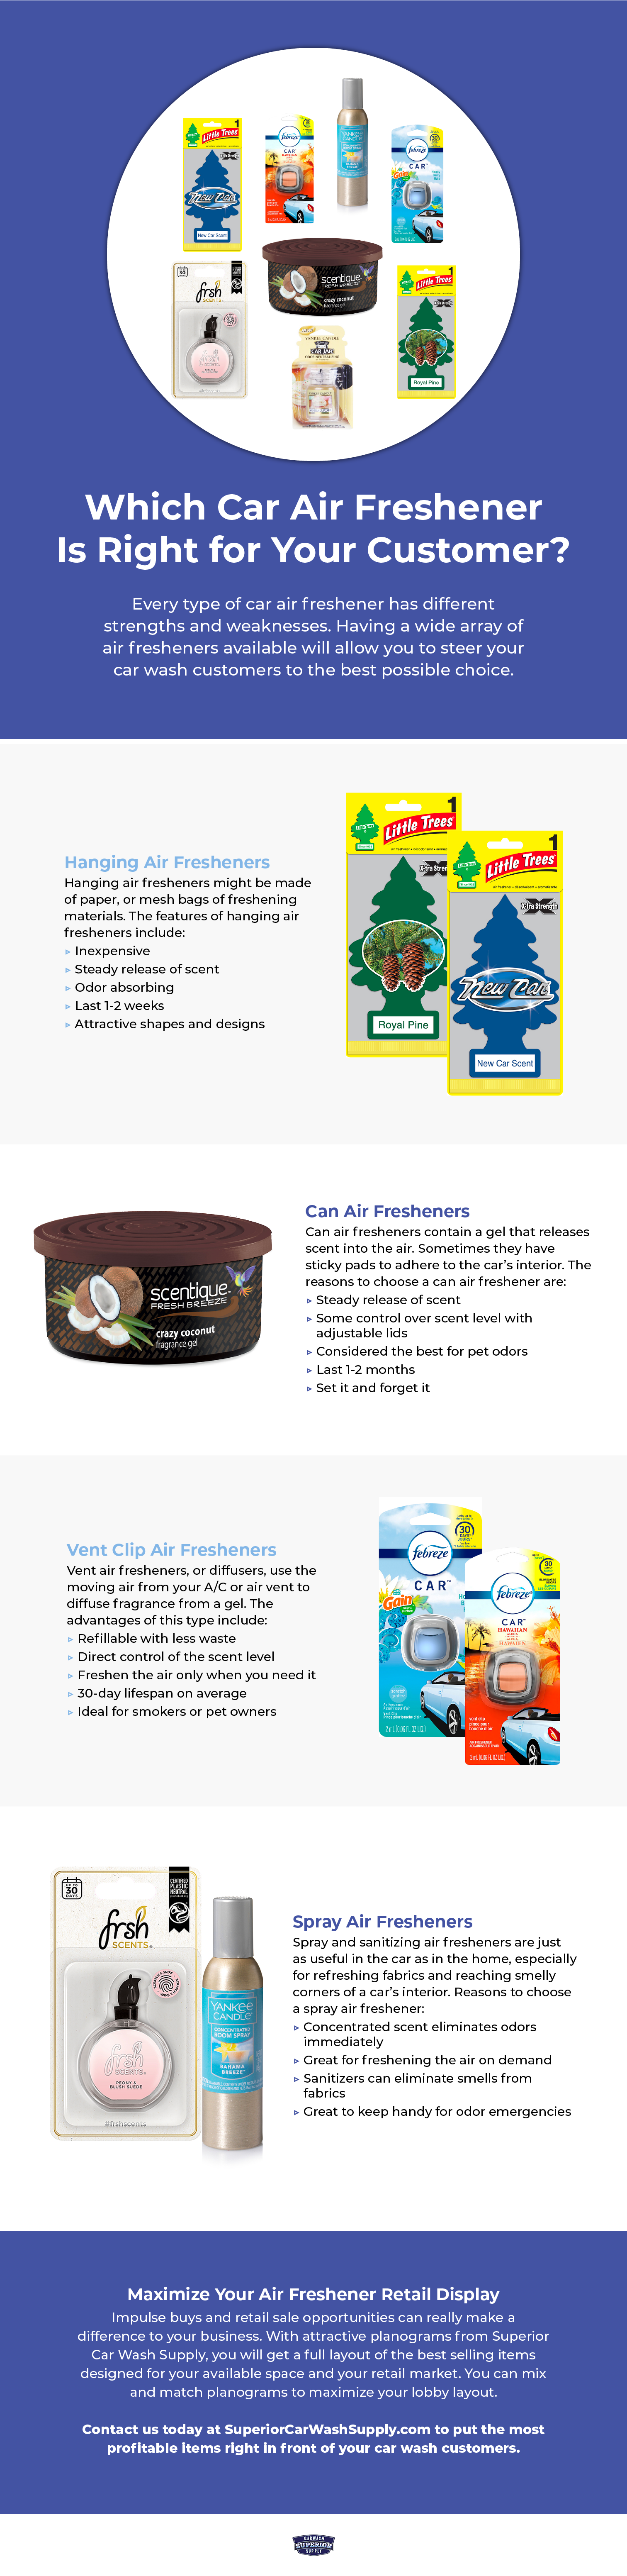 Which Car Air Freshener Is Right for Your Customer